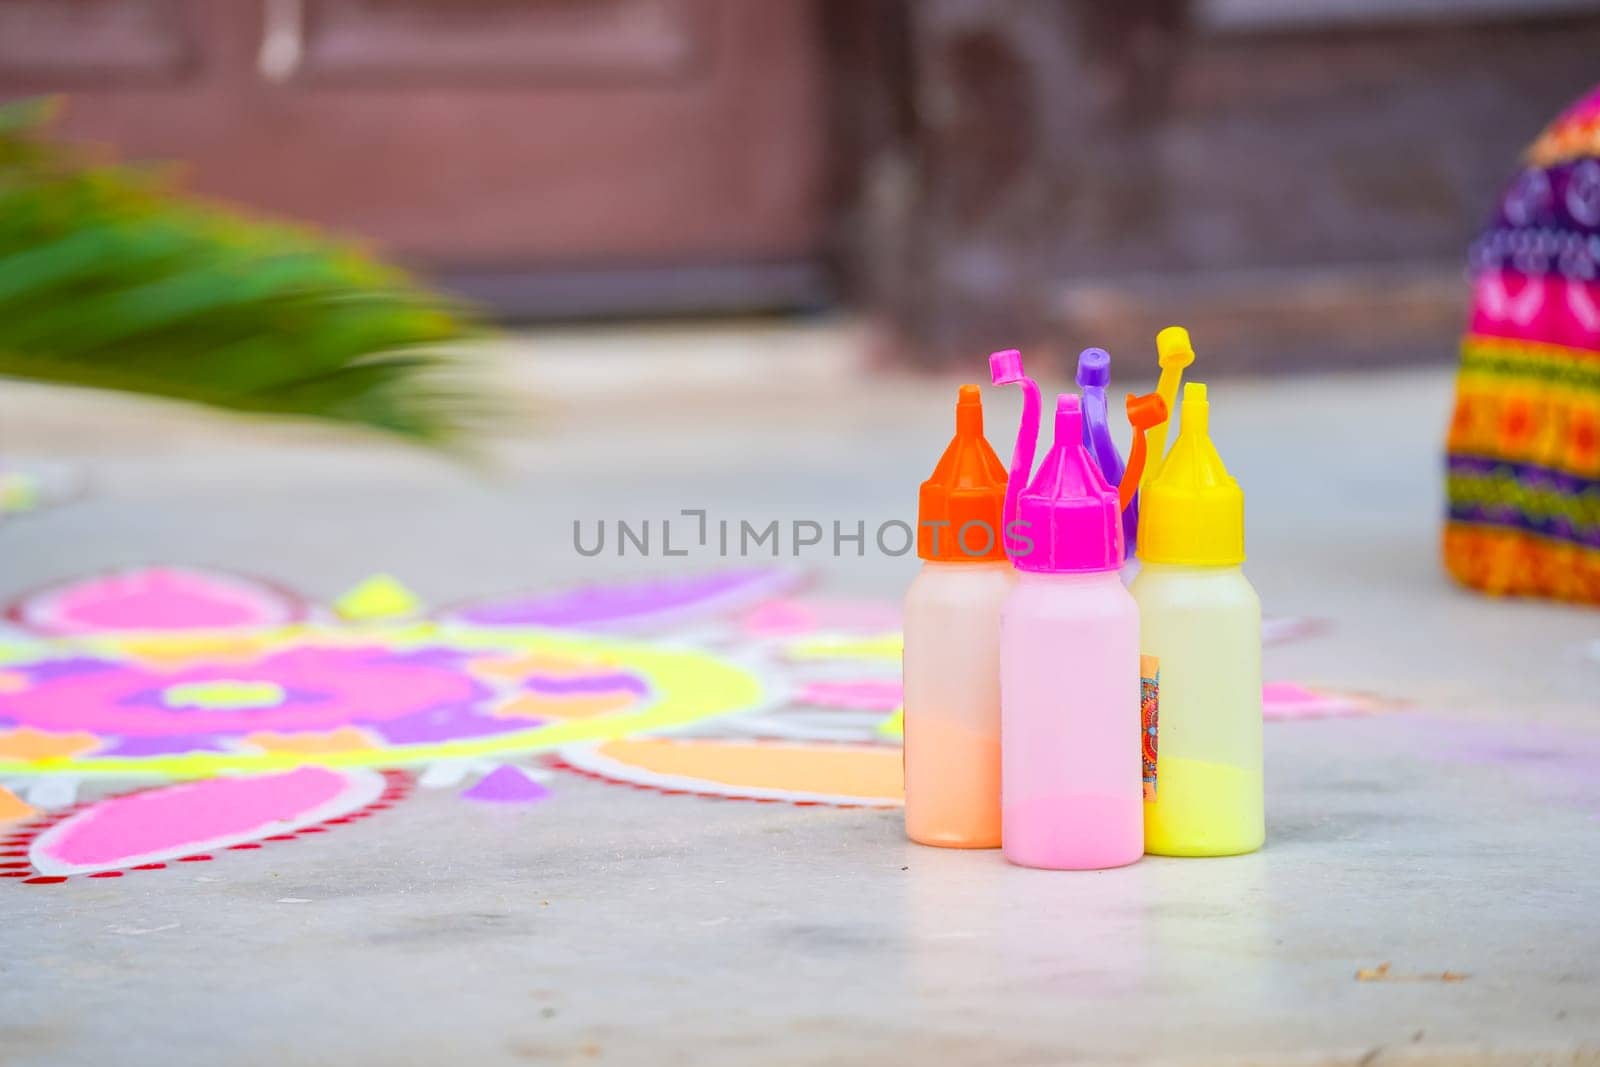 bottle of color powder used to make a rangoli a traditional art made on floors during festivals of diwali, dussera, onam in hindu culture